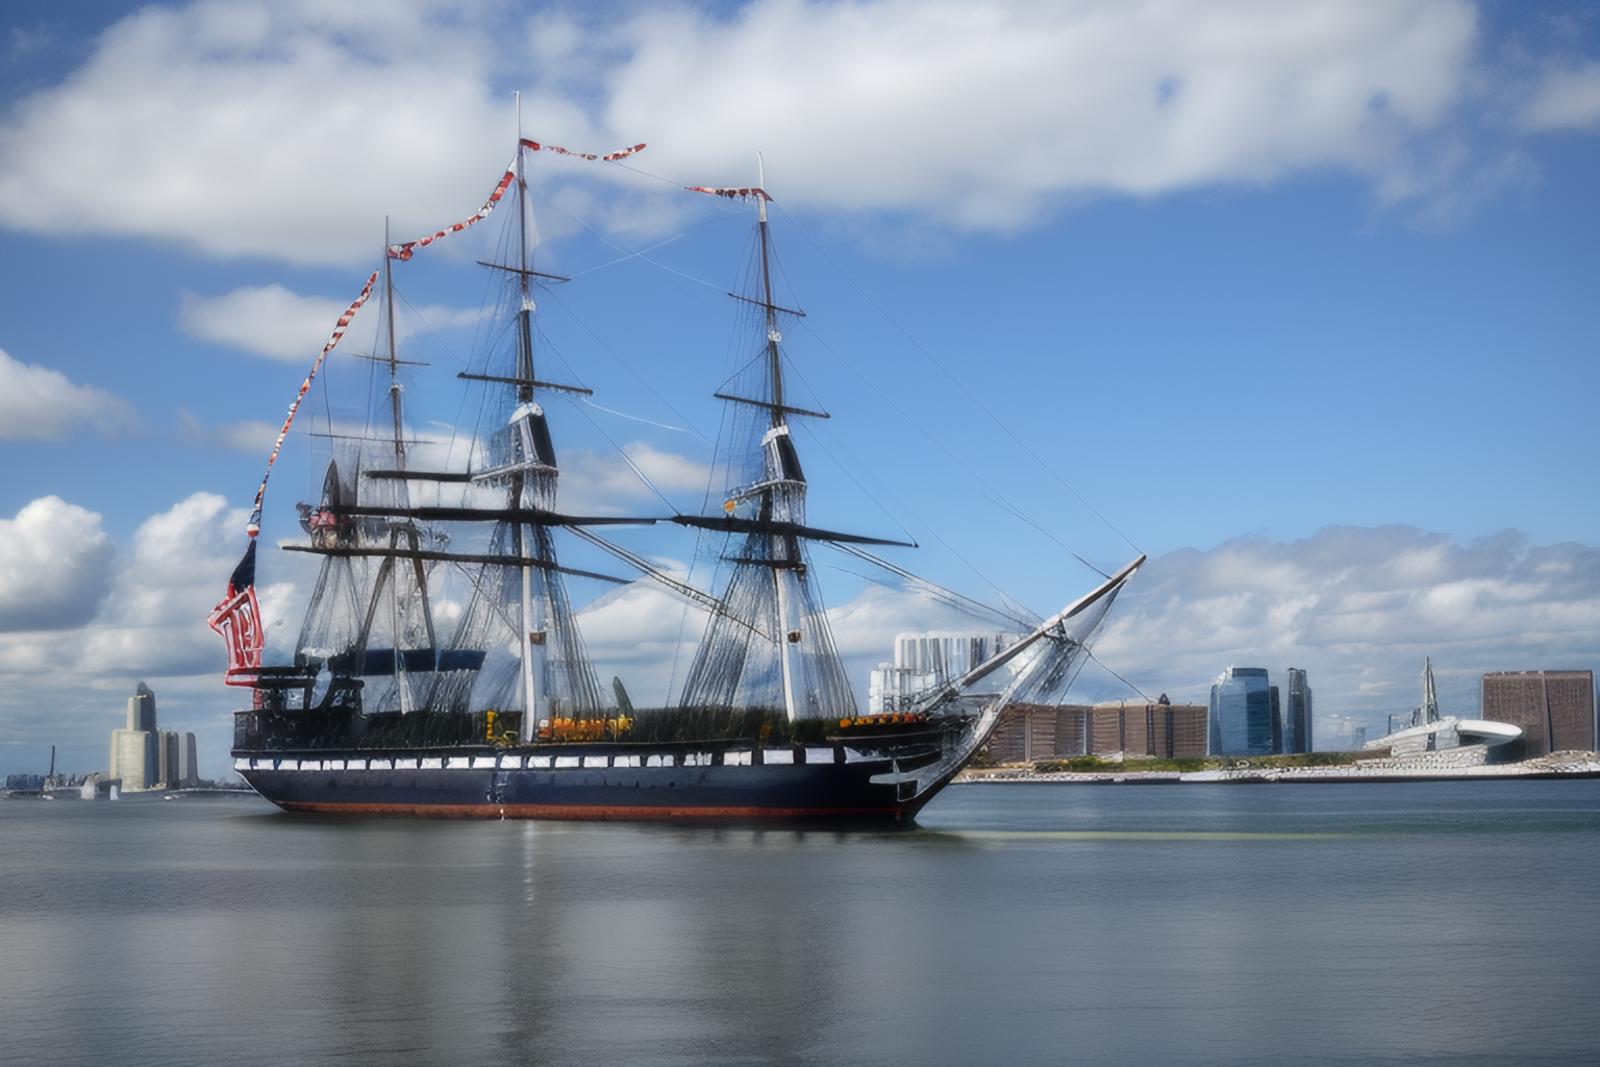 USS Constitution Frigate image by MajMorse